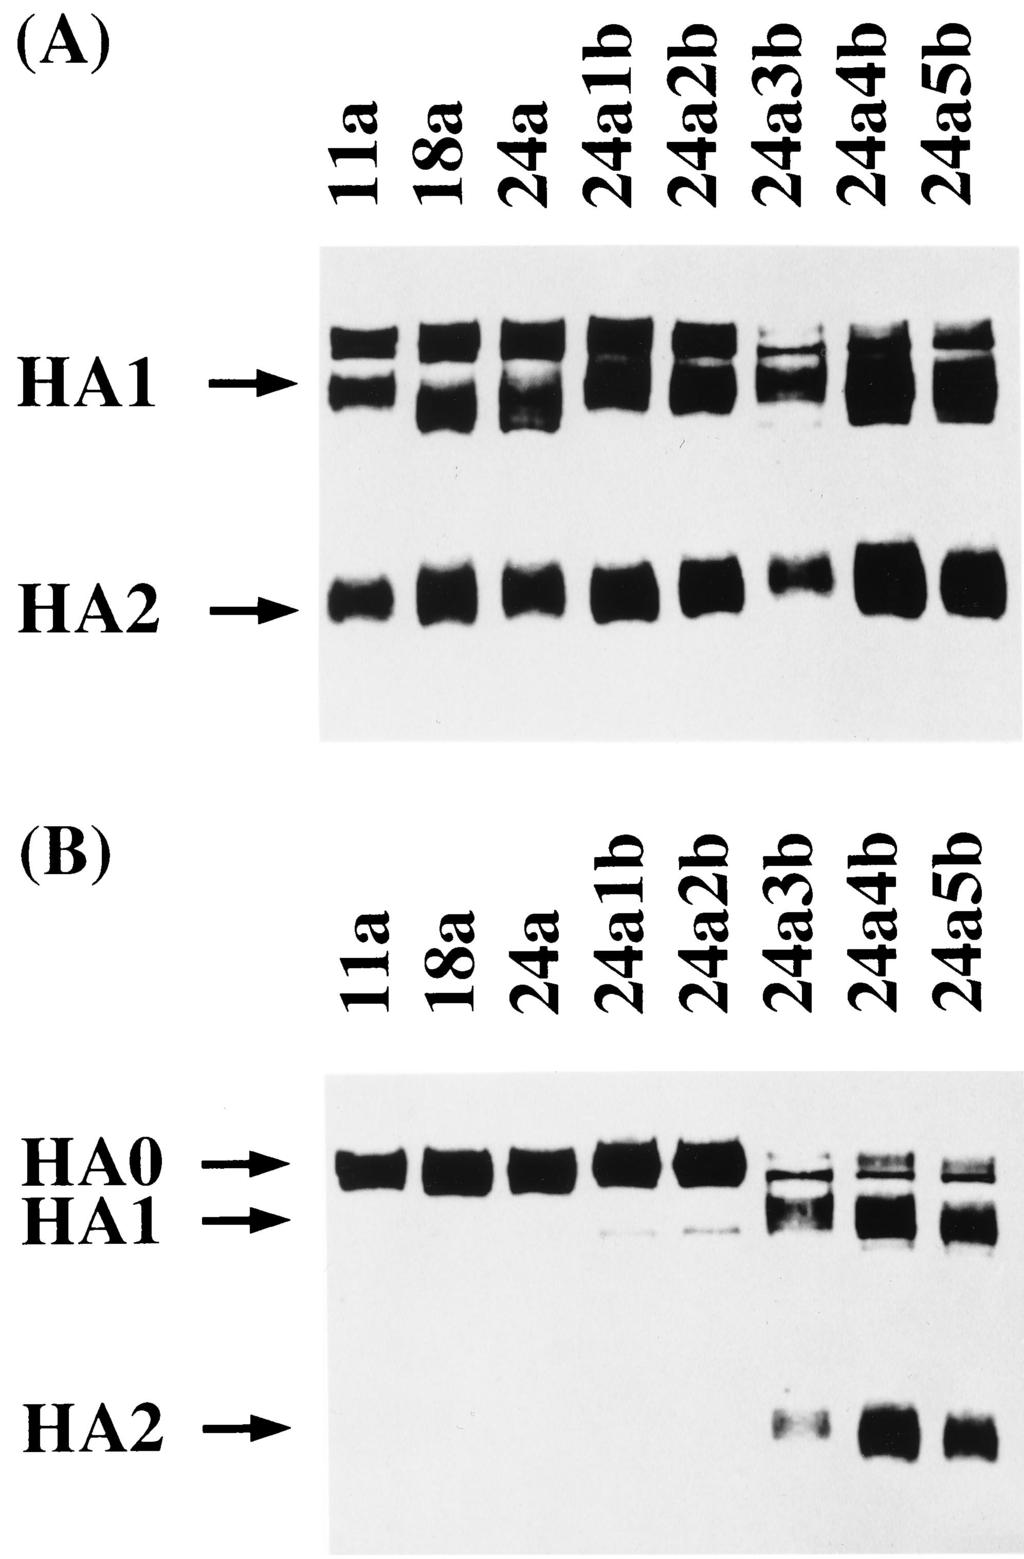 4442 NOTES J. VIROL. FIG. 1. Comparison of HA cleavability among viruses passaged in chickens. MDBK cells were infected with viruses and incubated in the presence (A) or absence (B) of trypsin (2.